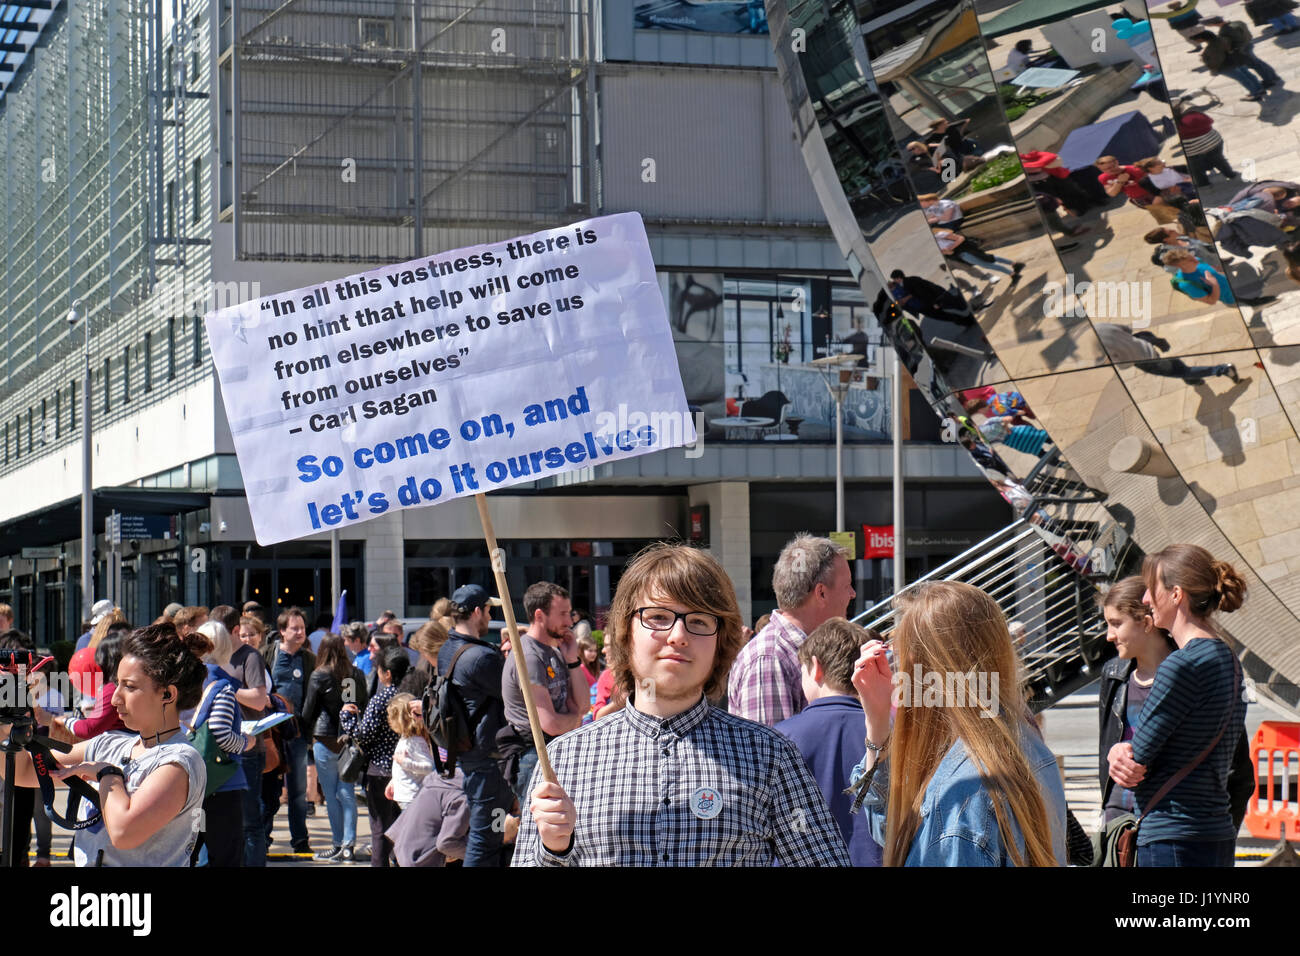 Bristol, UK. 22nd April, 2017. Protestors take part in the March for Science. The March for Science is intended to be the first step in a global movement to defend the role science plays in health, safety, the economy, and government and is one of a number of similar events taking place in cities around the world. Keith Ramsey/Alamy Live News Stock Photo